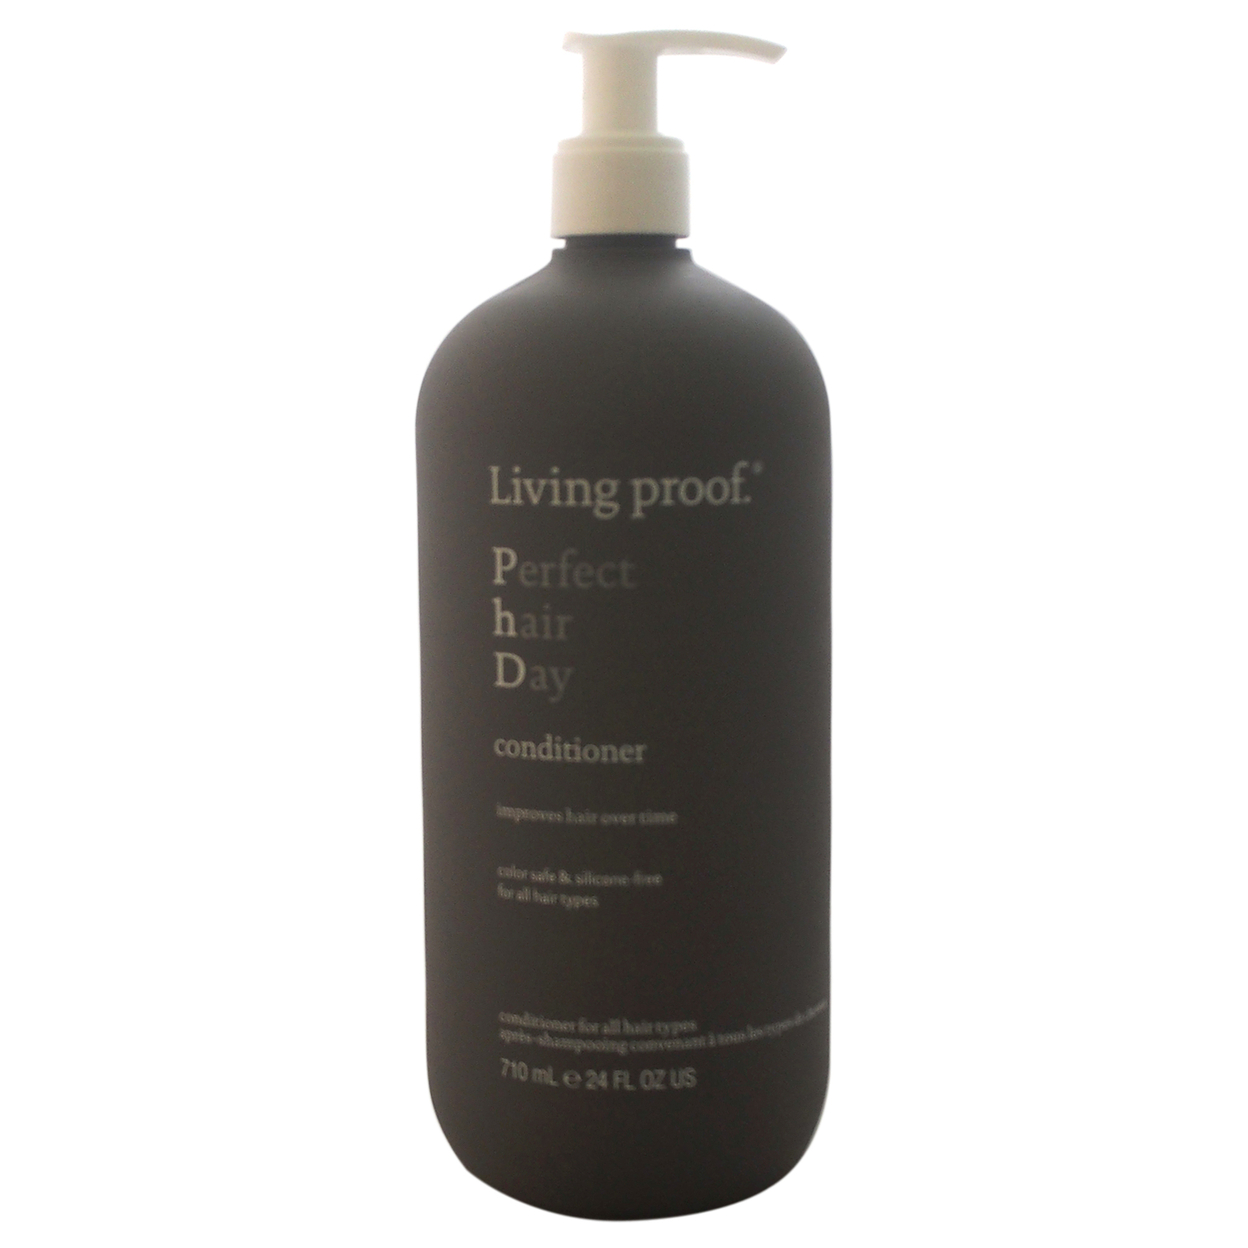 Living Proof Unisex HAIRCARE Perfect Hair Day Conditioner 24 Oz